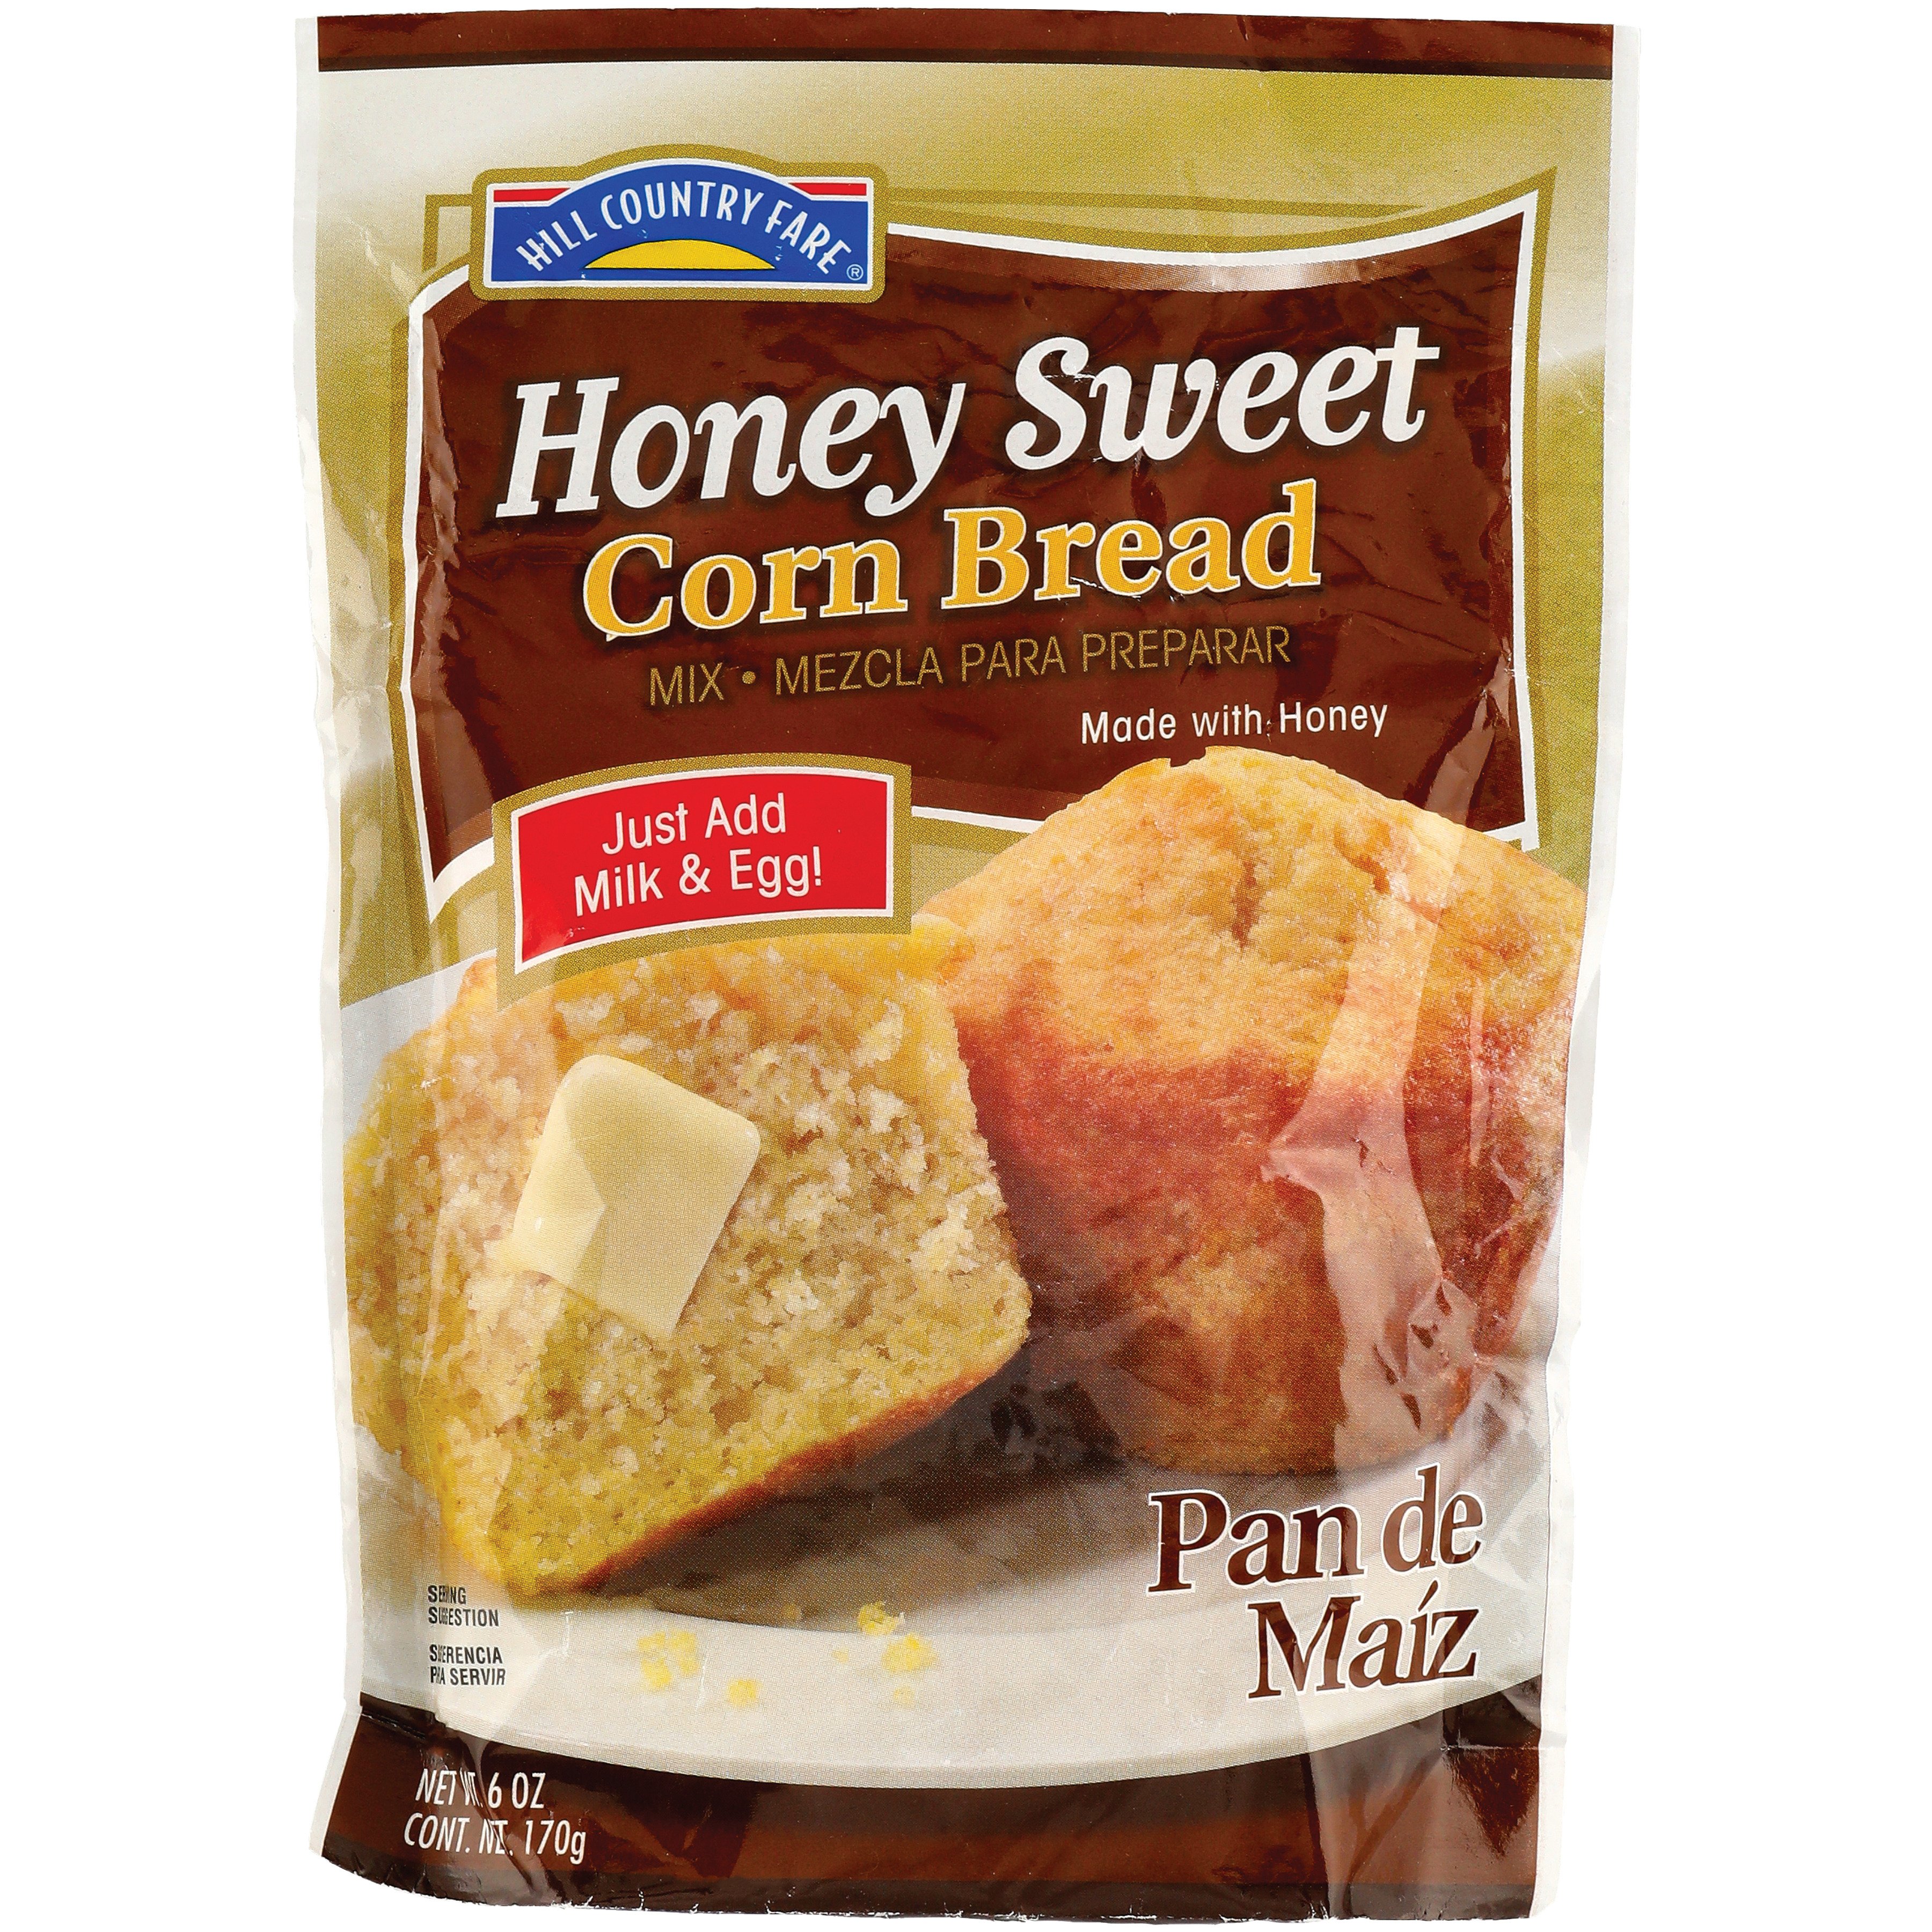 Hill Country Fare Honey Sweet Corn Bread Mix